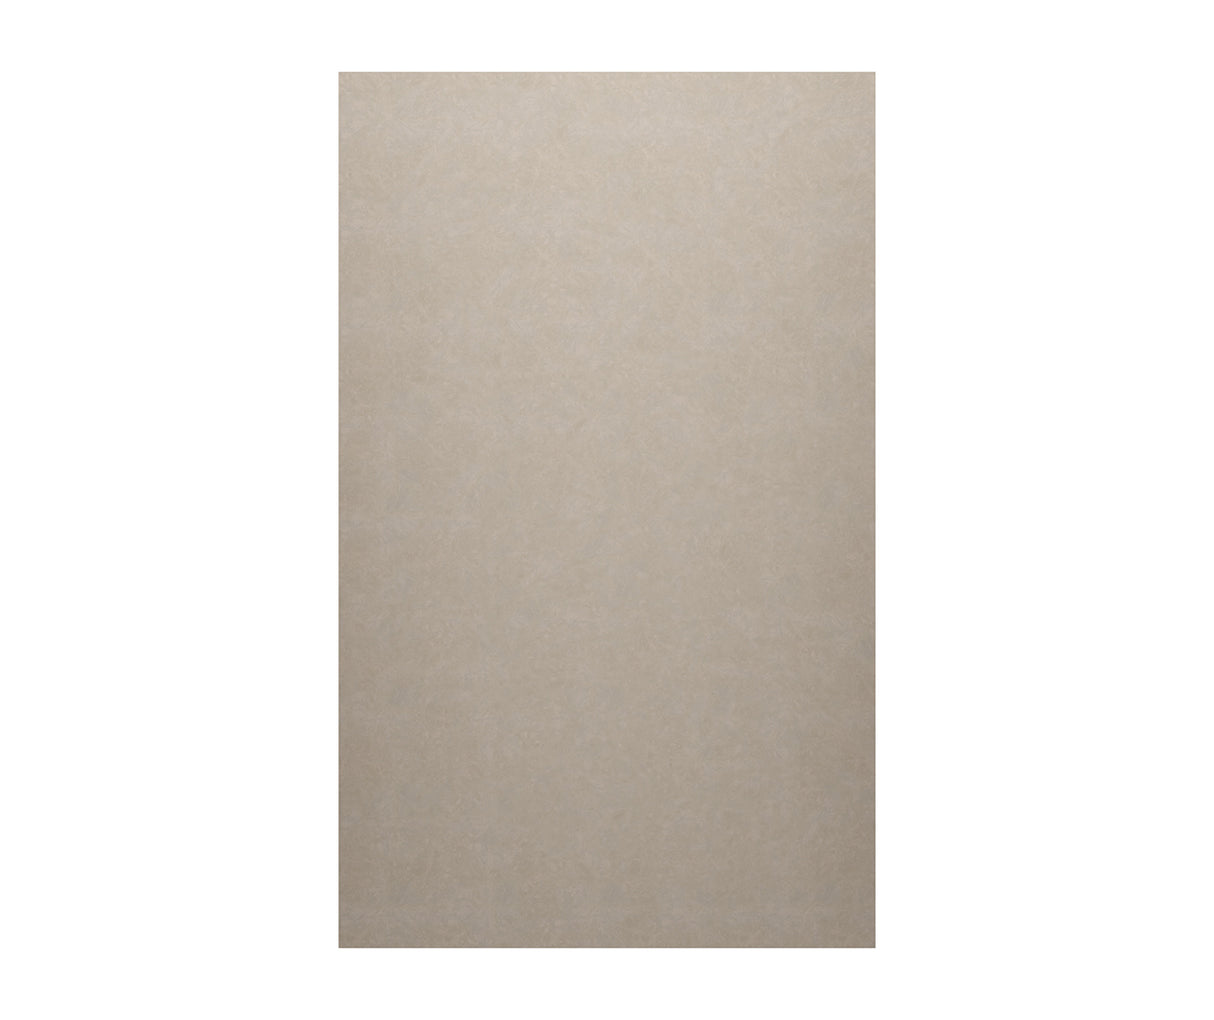 Swanstone SS-3672-1 36 x 72 Swanstone Smooth Glue up Bathtub and Shower Single Wall Panel in Limestone SS0367201.218